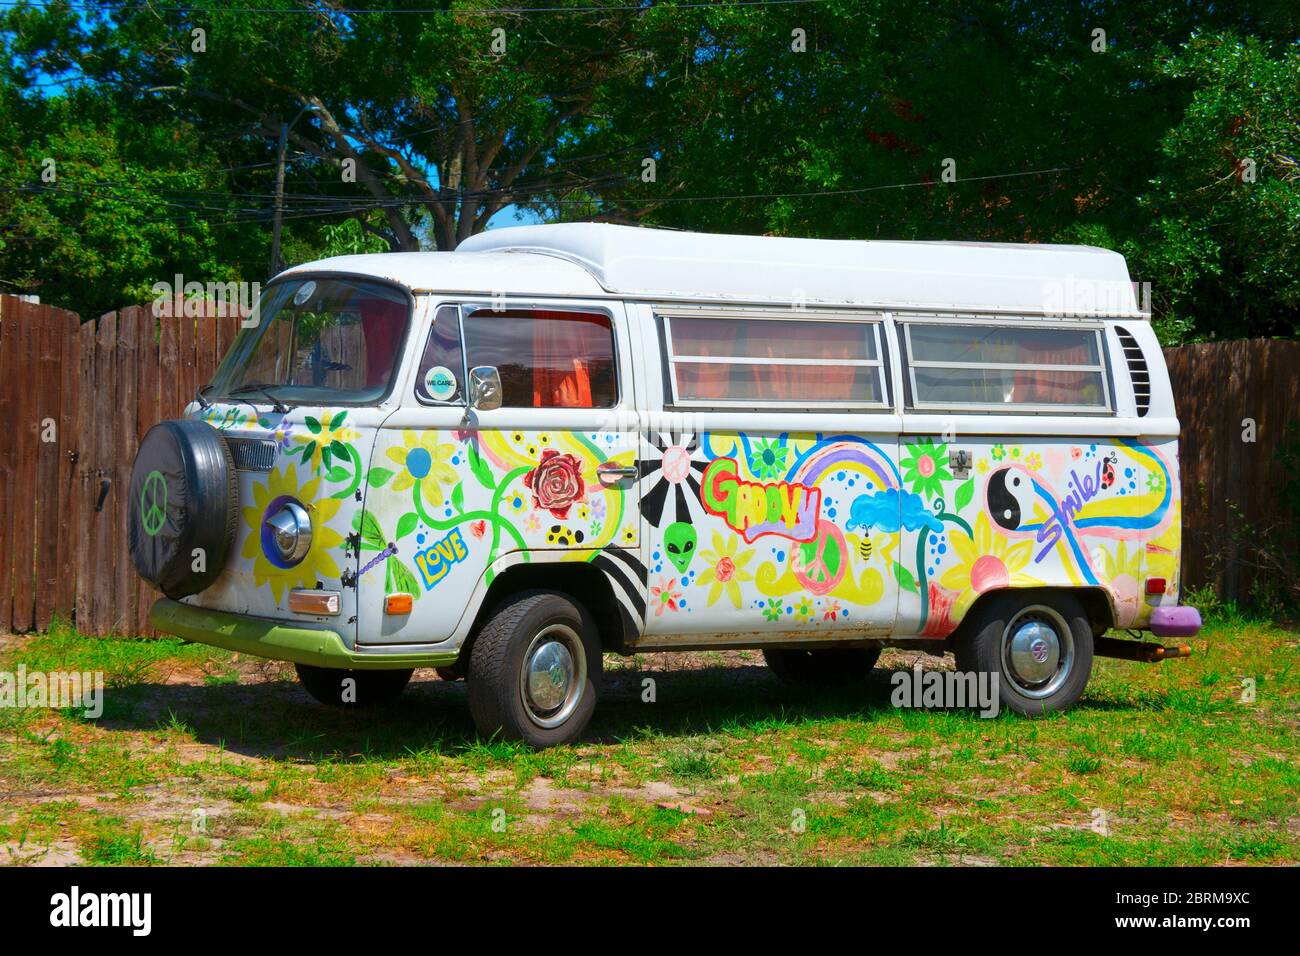 Saint Petersburg, Florida / USA - May 3, 2020: Antique hippie 1970  Volkswagen VW Type 2 camper van with love and groovy colorful artwork hand  painted Stock Photo - Alamy